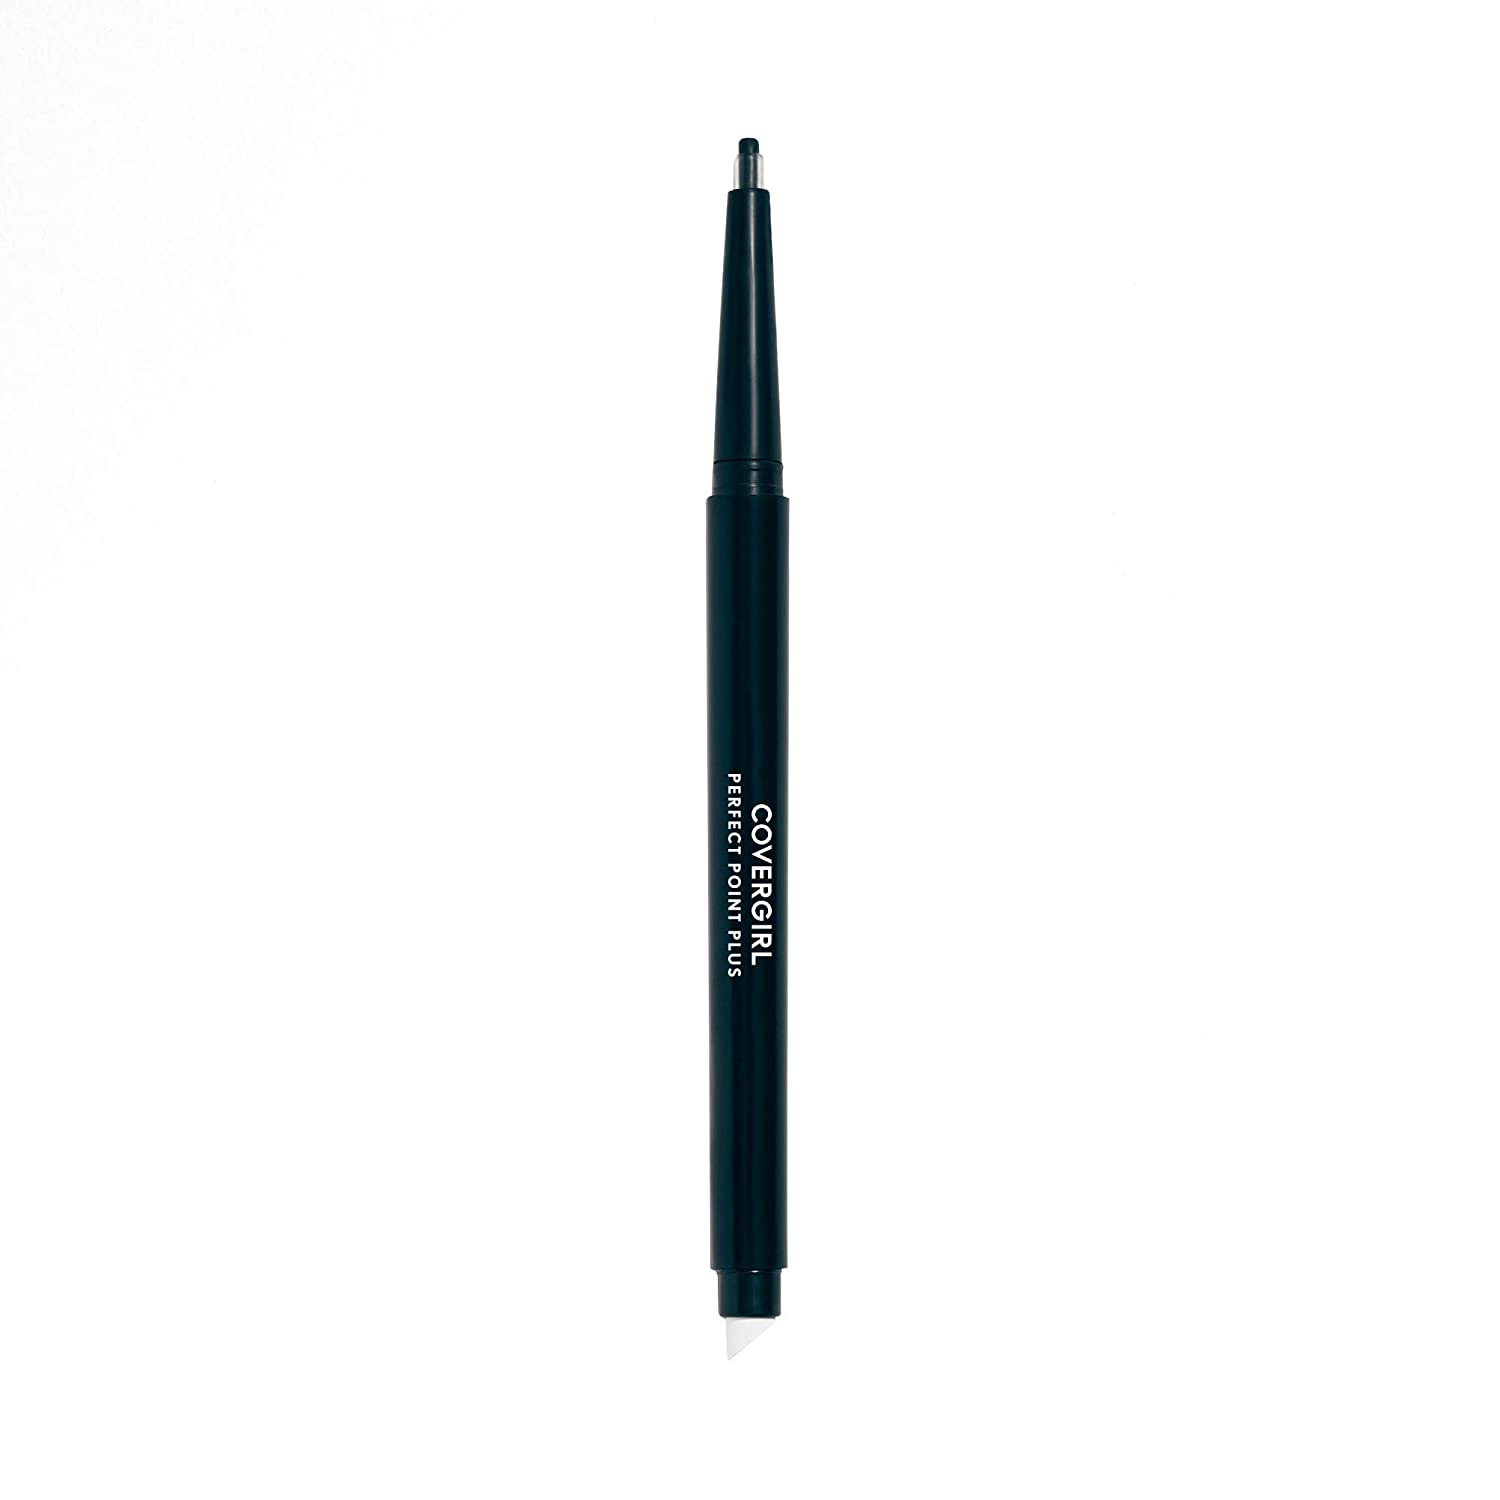 Buy Covergirl Perfect Point Plus Eyeliner - Black Only | cosmeticsdiarypk 100% Original Beauty Products